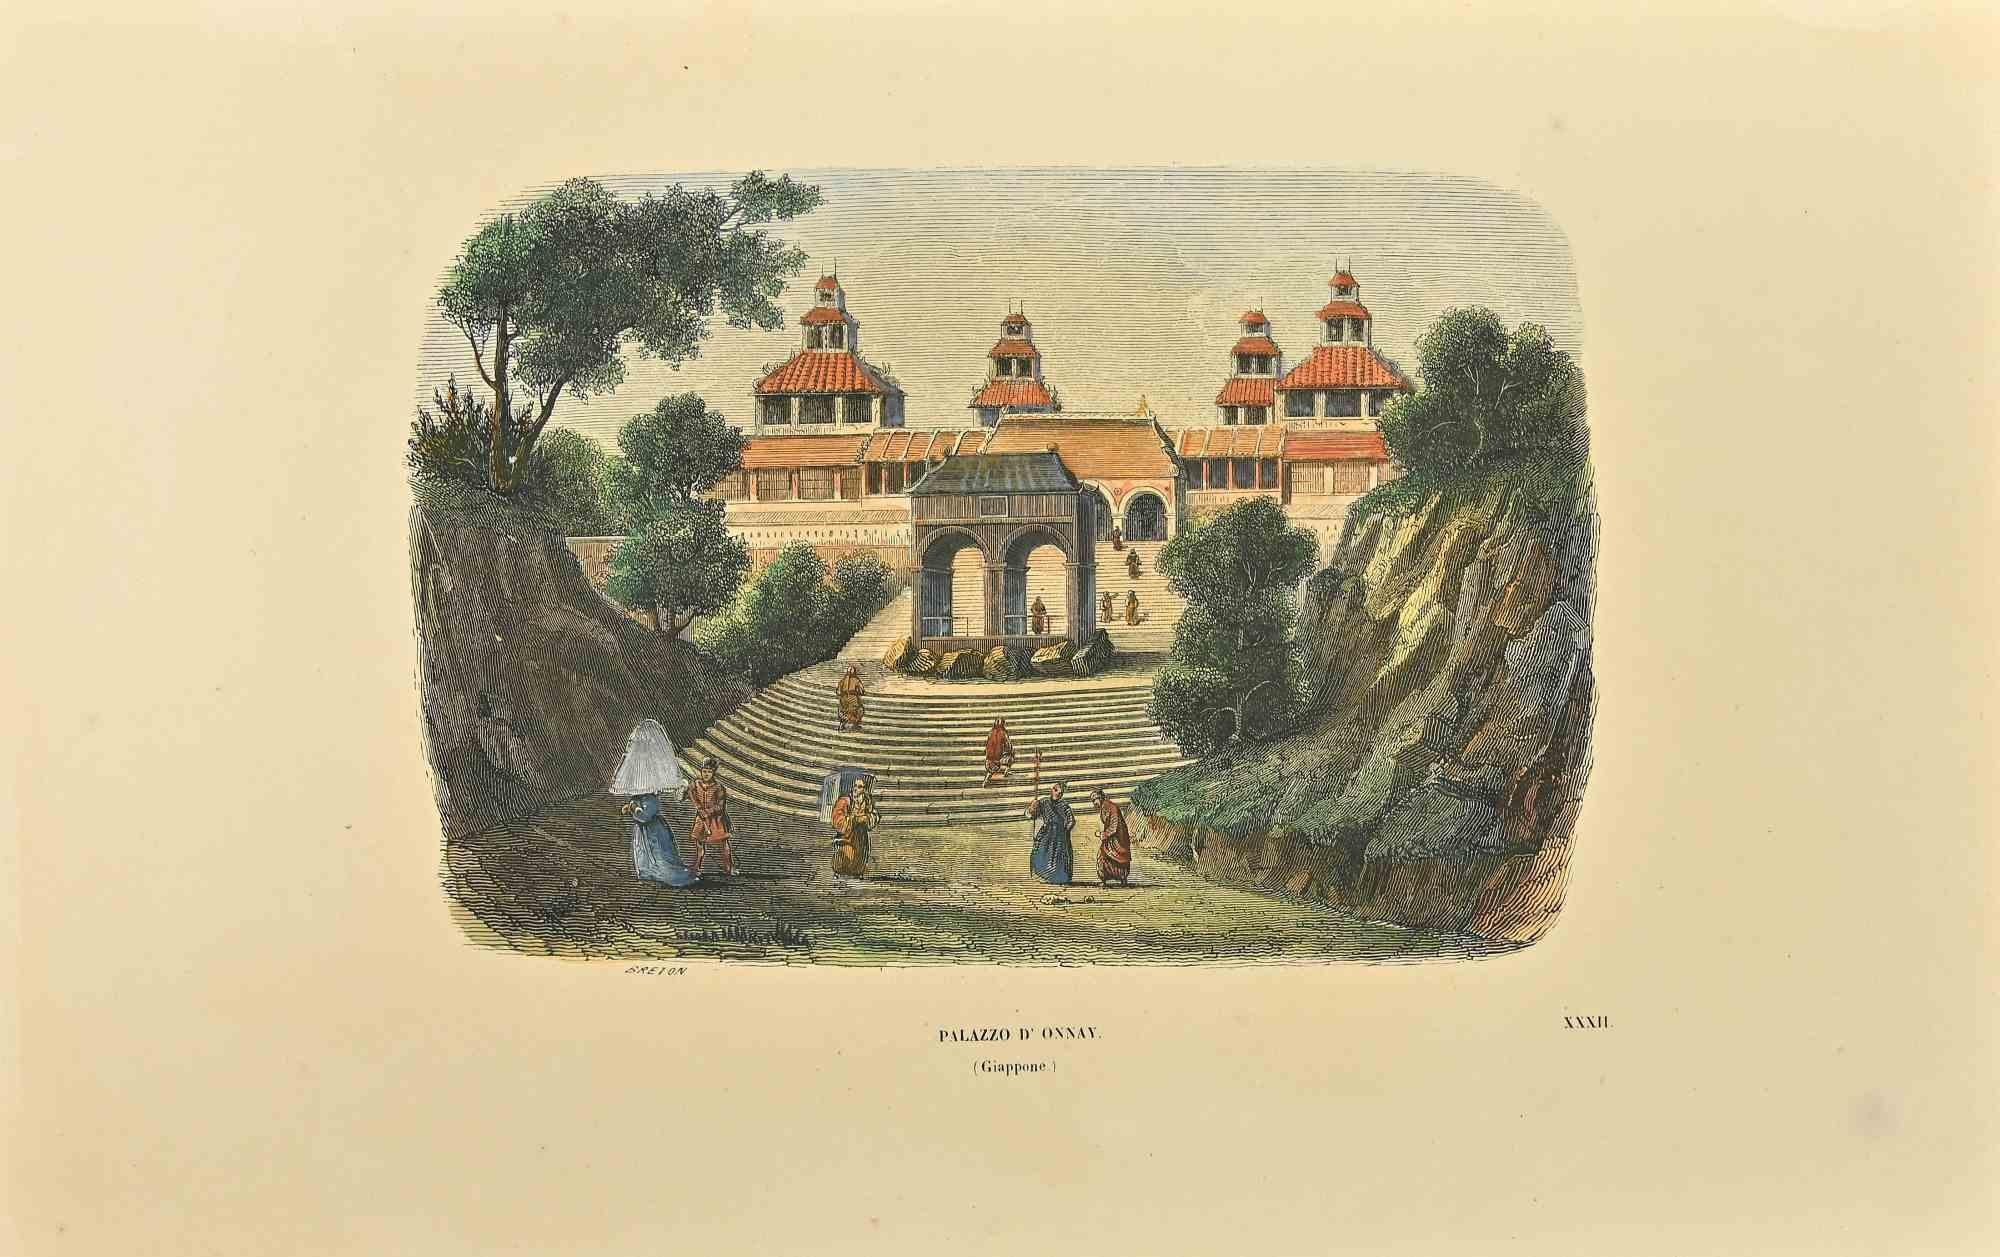 View of the Palace of Onnay in Japan is a woodcut on creamy-colored paper realized by Ernest Breton in 1843.

Signed on the plate, titled on the lower.

Good conditions.

The artwork is depicted through soft strokes in a well-balanced composition,